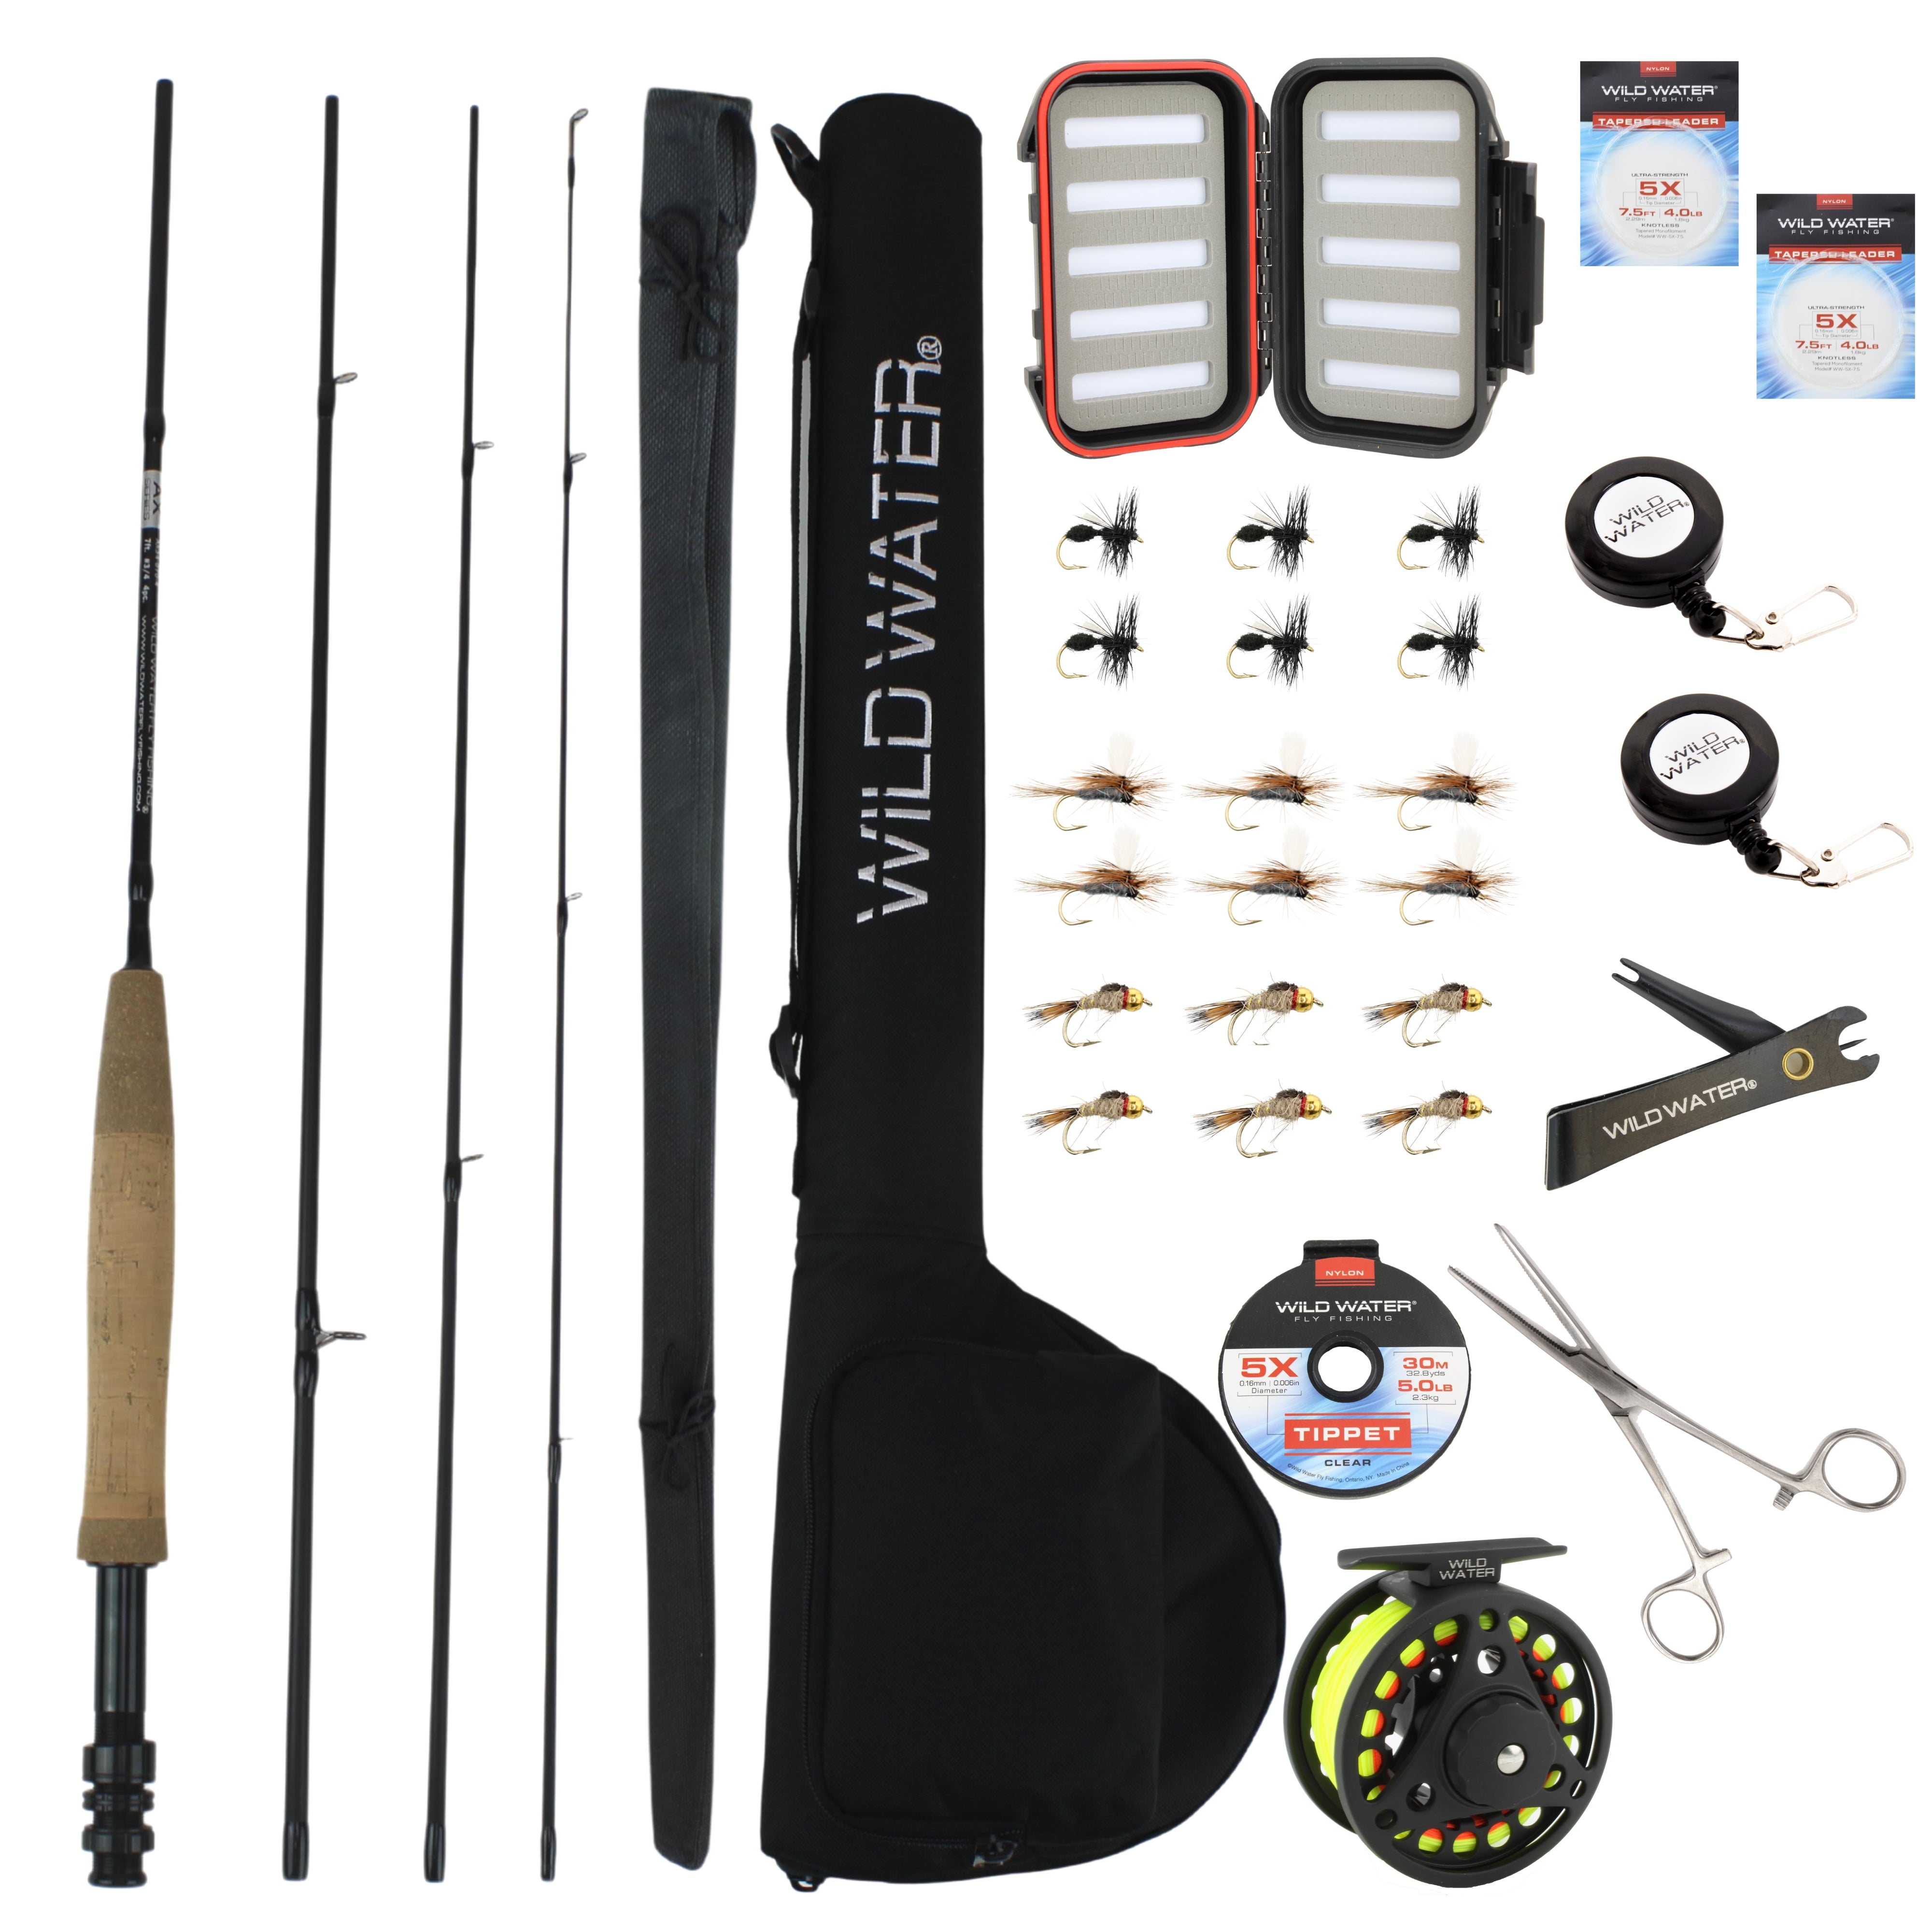 Wild Water Deluxe Fly Fishing Combo, 7 ft 3/4 wt Rod